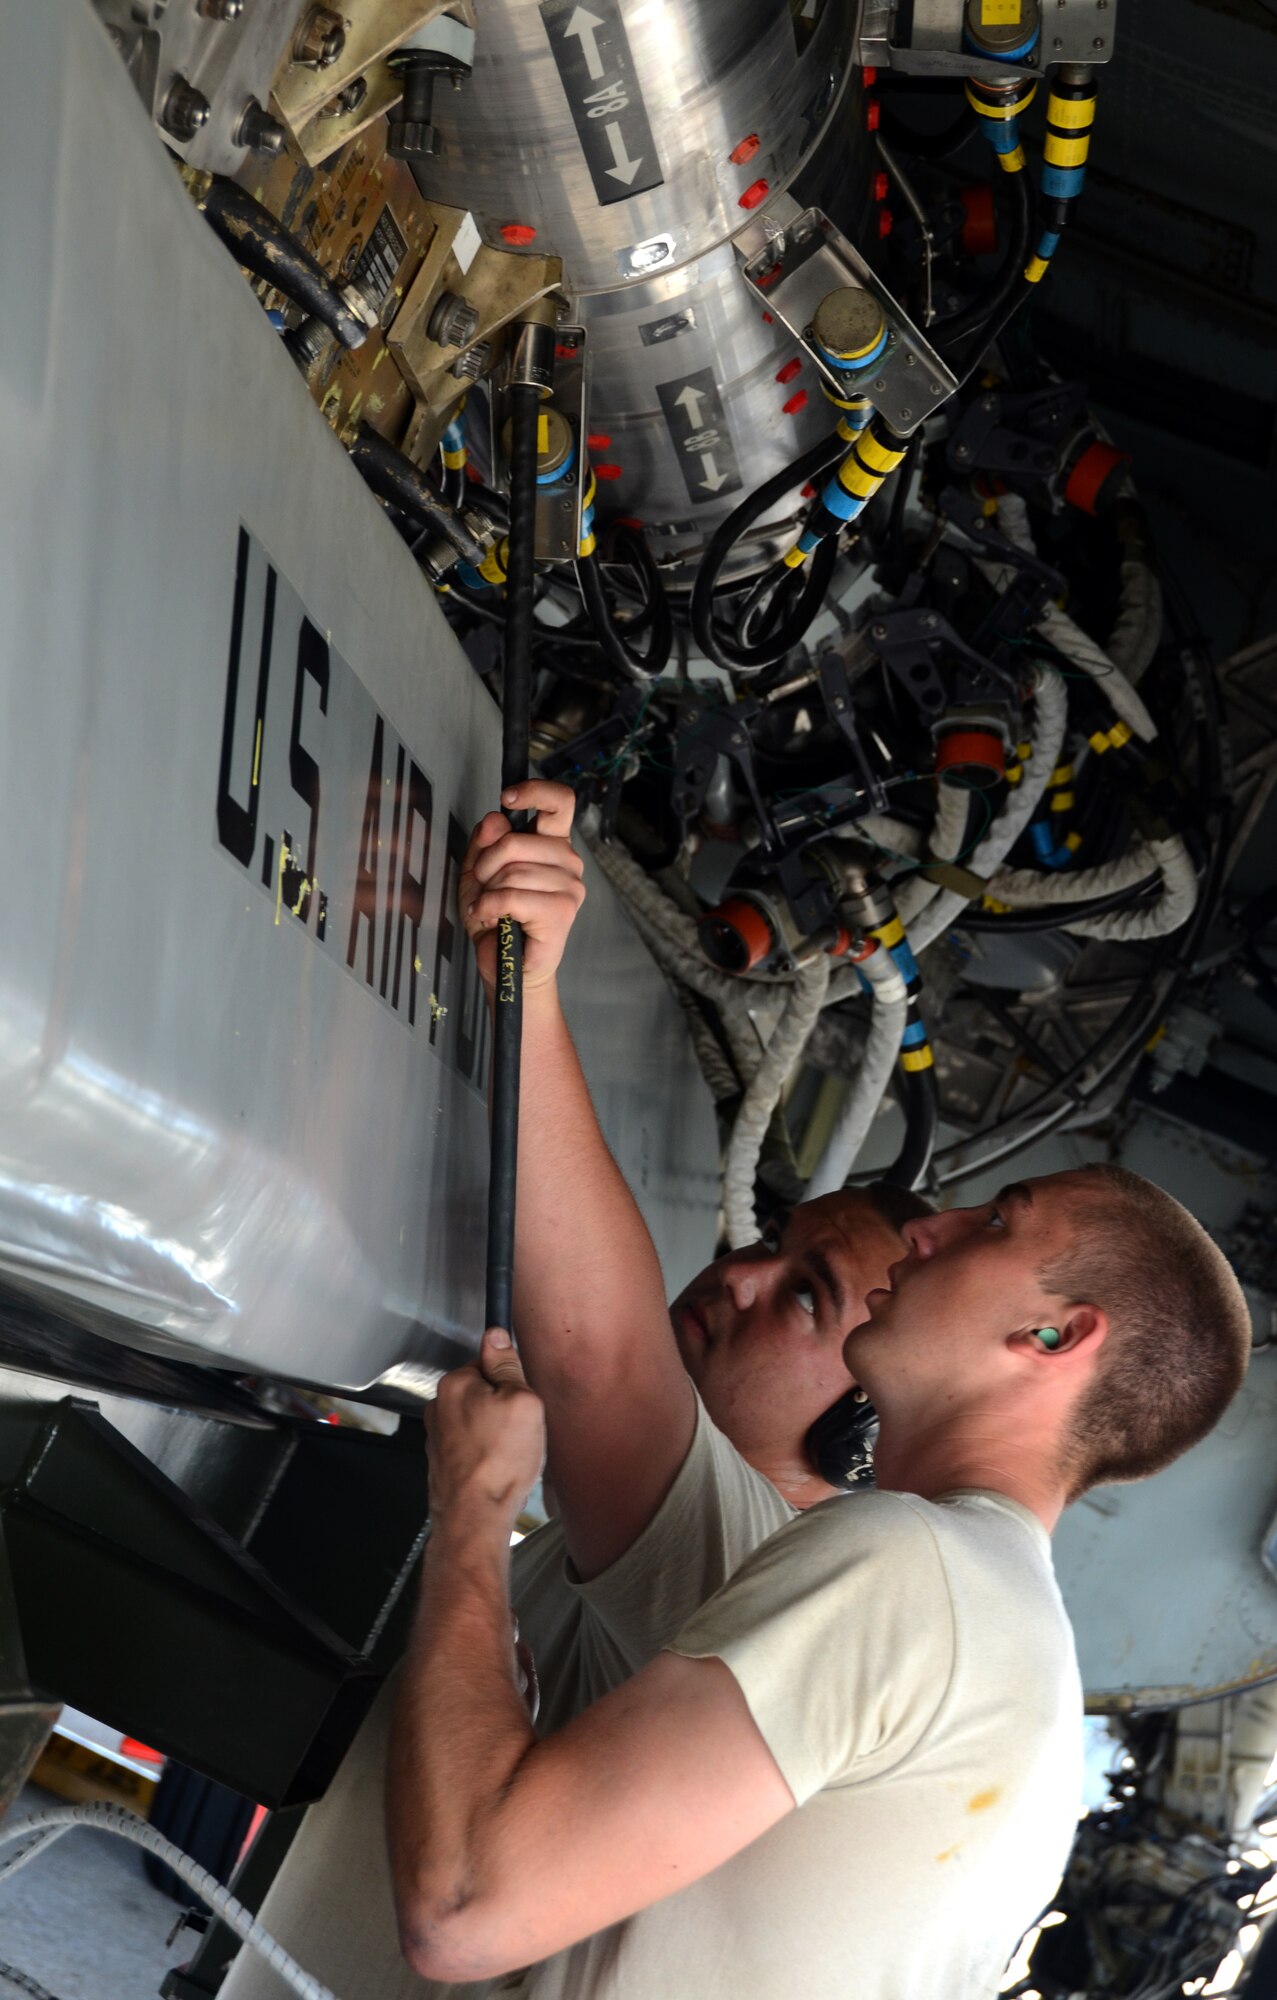 Airman 1st Class Adam Schaetzl (right) and Staff Sgt. Brody Bundy, 36th Expeditionary Aircraft Maintenance Squadron weapons load technicians, secure a training AGM-86C Conventional Air-Launched Cruise Missile inside the belly of a B-52 Stratofortress during a load demonstration at Andersen Air Force Base, Guam, April 16, 2013. All EAMUs deployed to Andersen have to pass a load inspection within 10 days of arrival as part of a U.S. Pacific Command requirement to ensure all tools and equipment are mission ready. Maintainers also obtain munitions-loading experience in both a training and tropical environment. (U.S. Air Force photo by Senior Airman Benjamin Wiseman/Released)